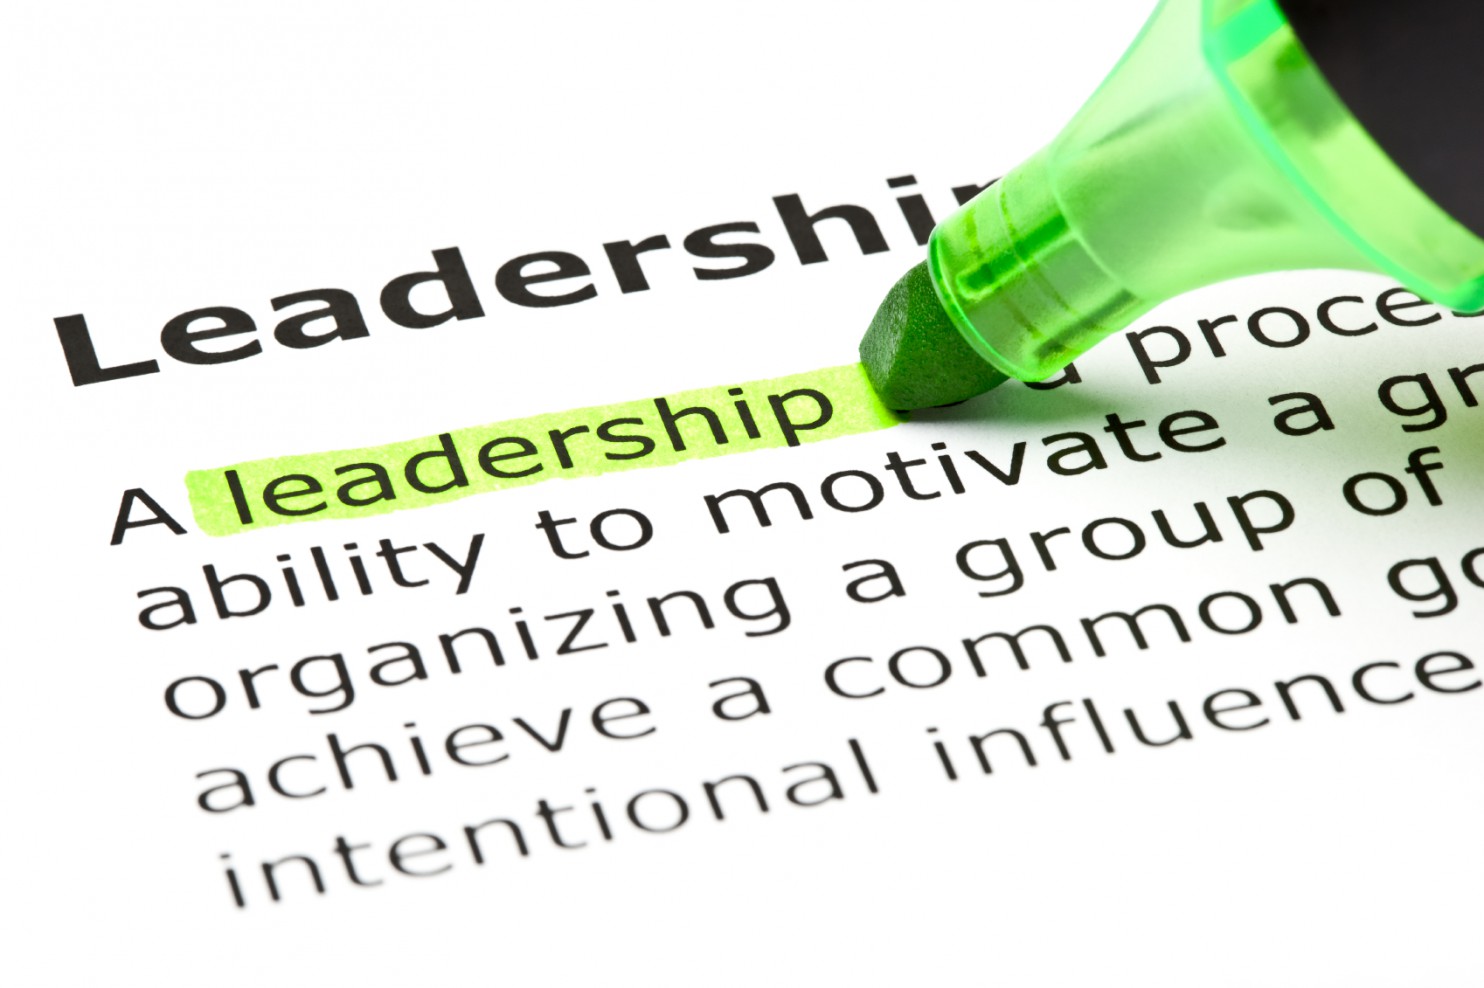 The word 'Leadership' highlighted in green with felt tip pen